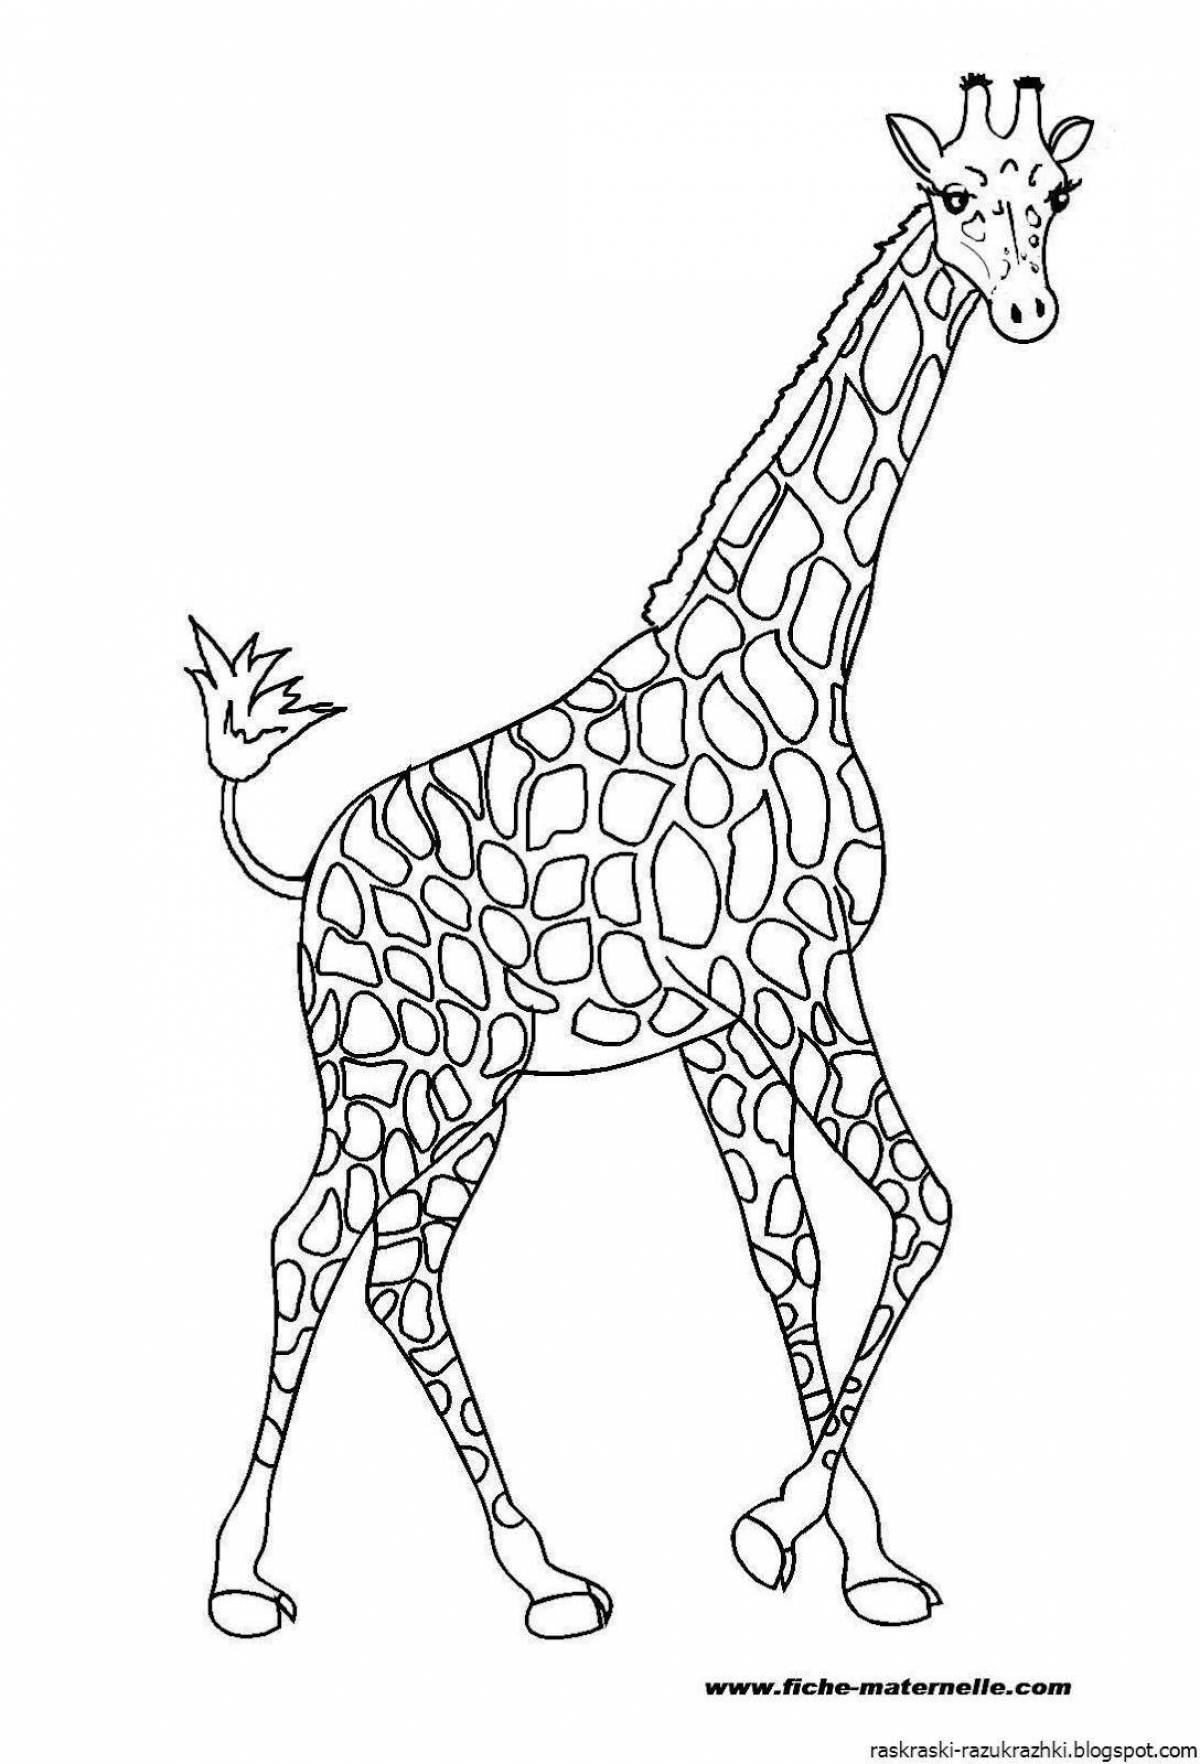 Animated drawing of a giraffe for children